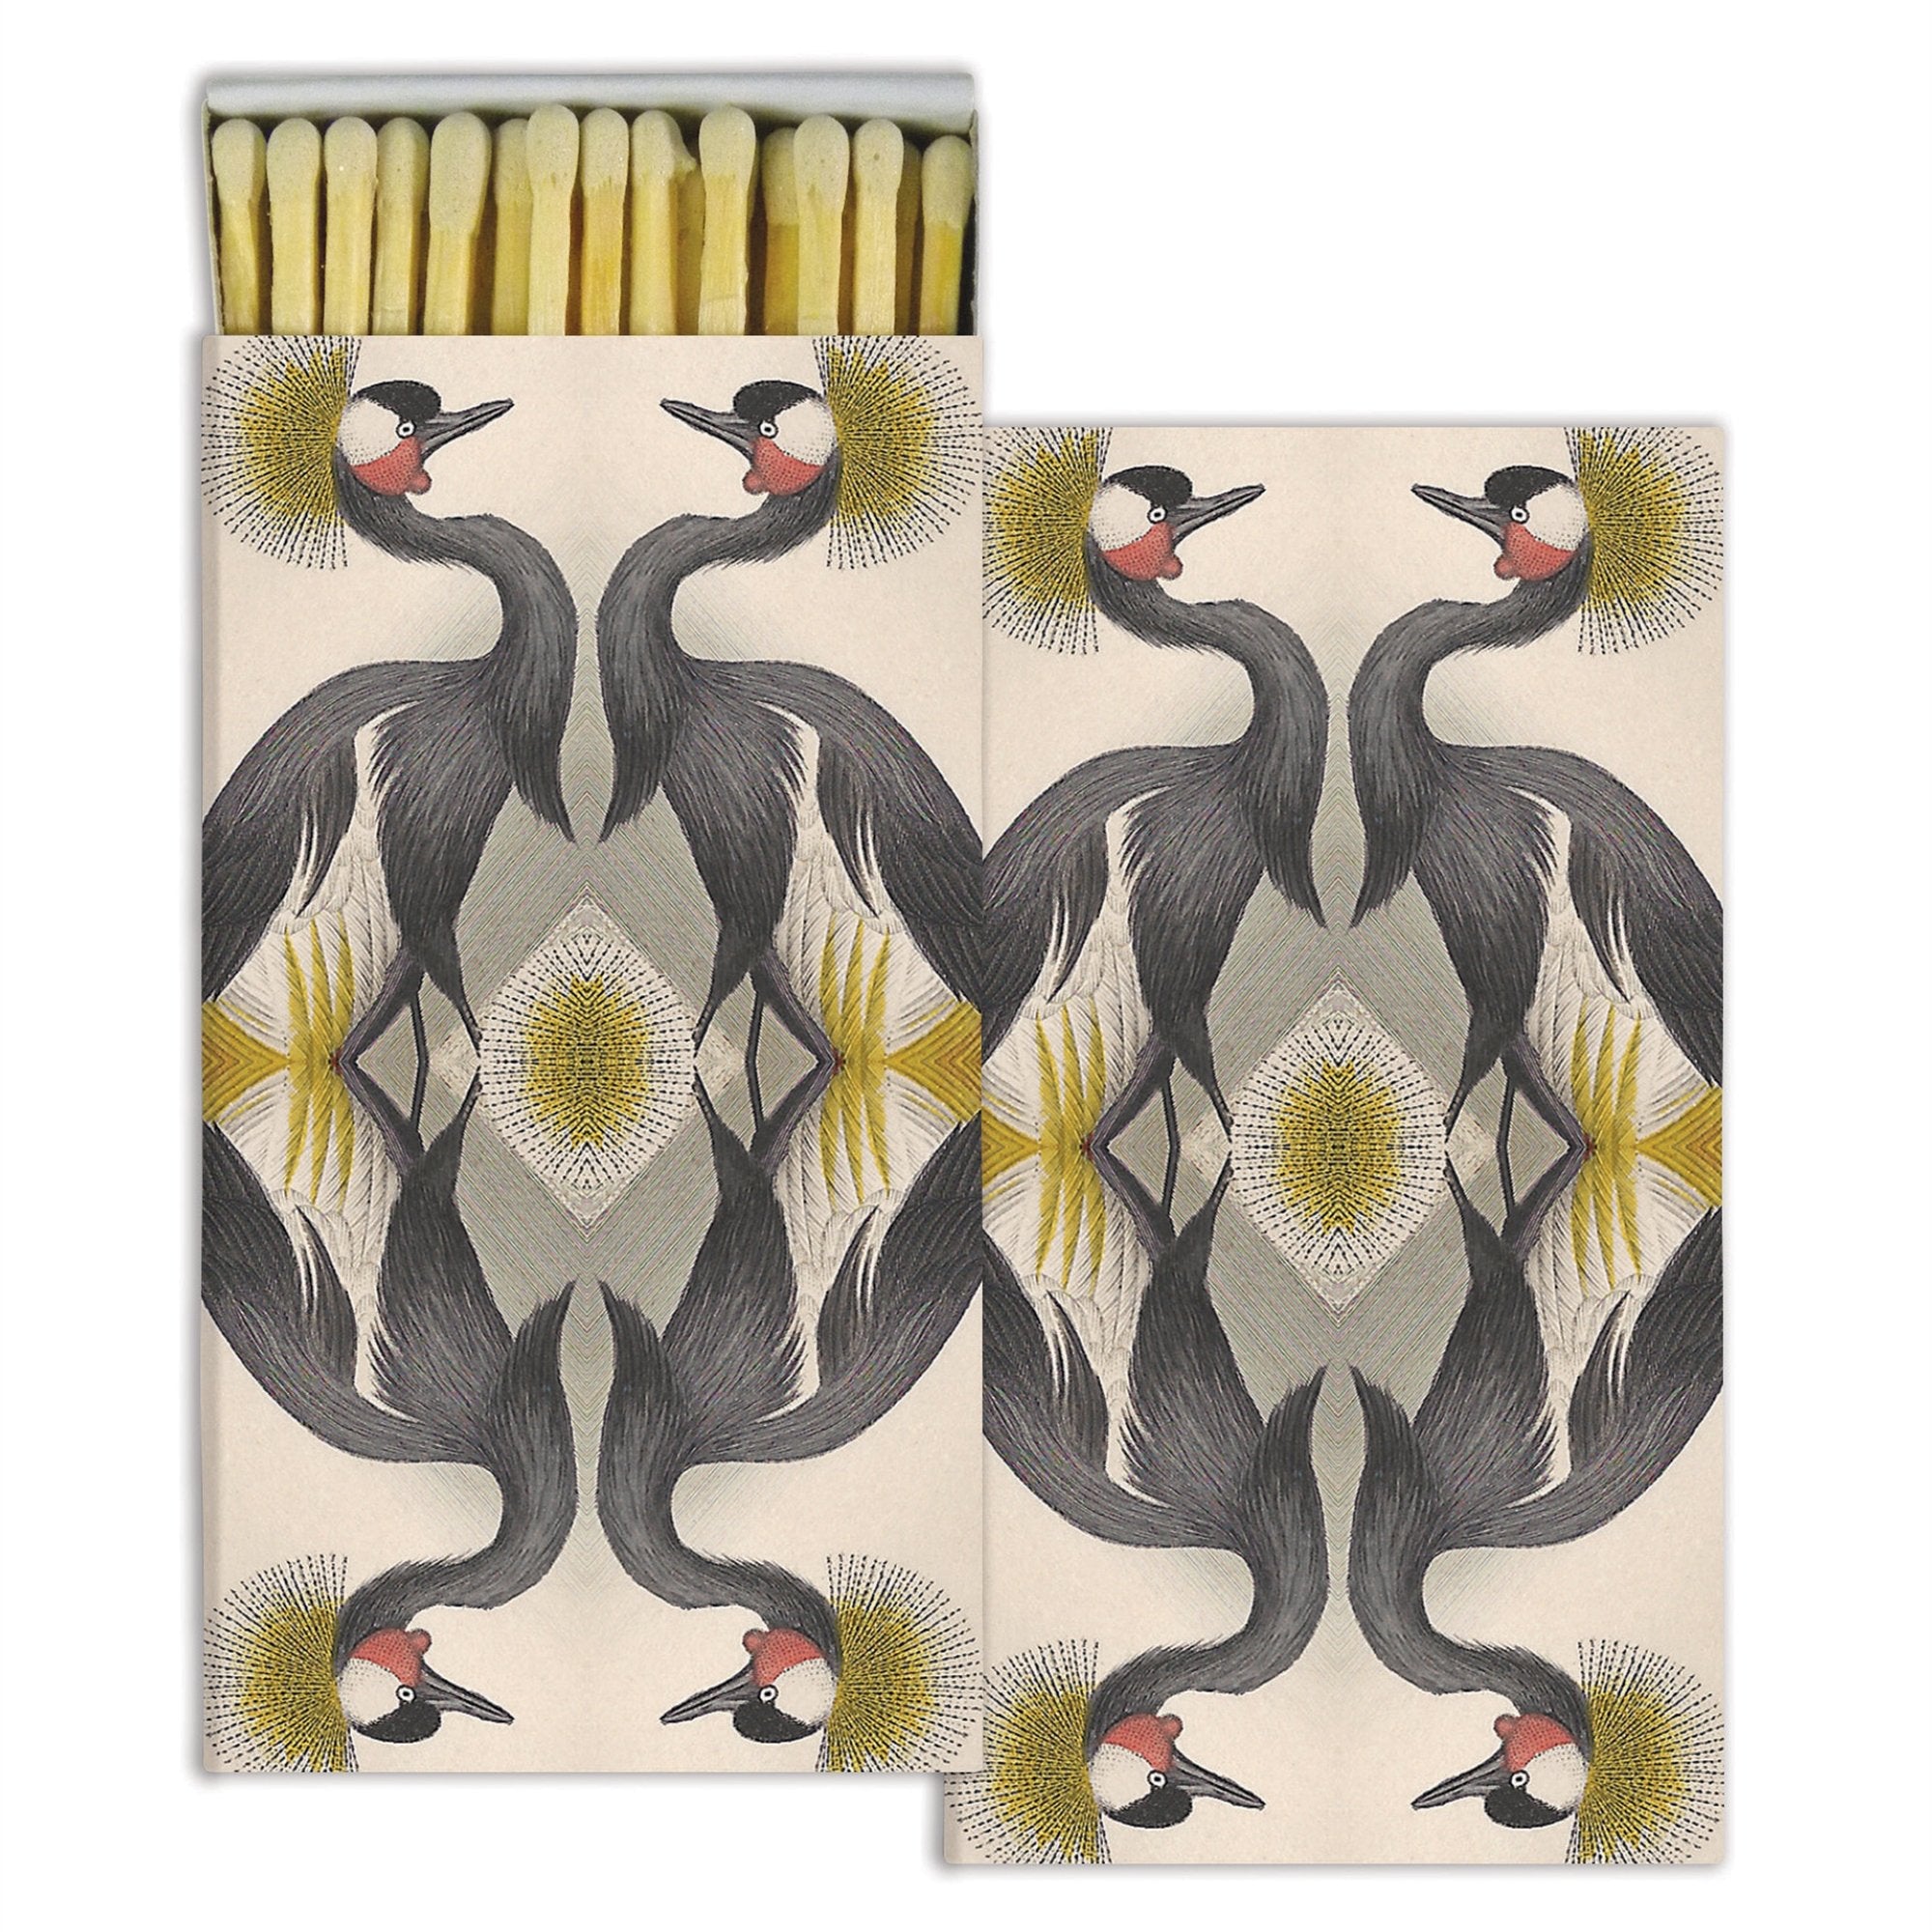 Crested Cranes Matches